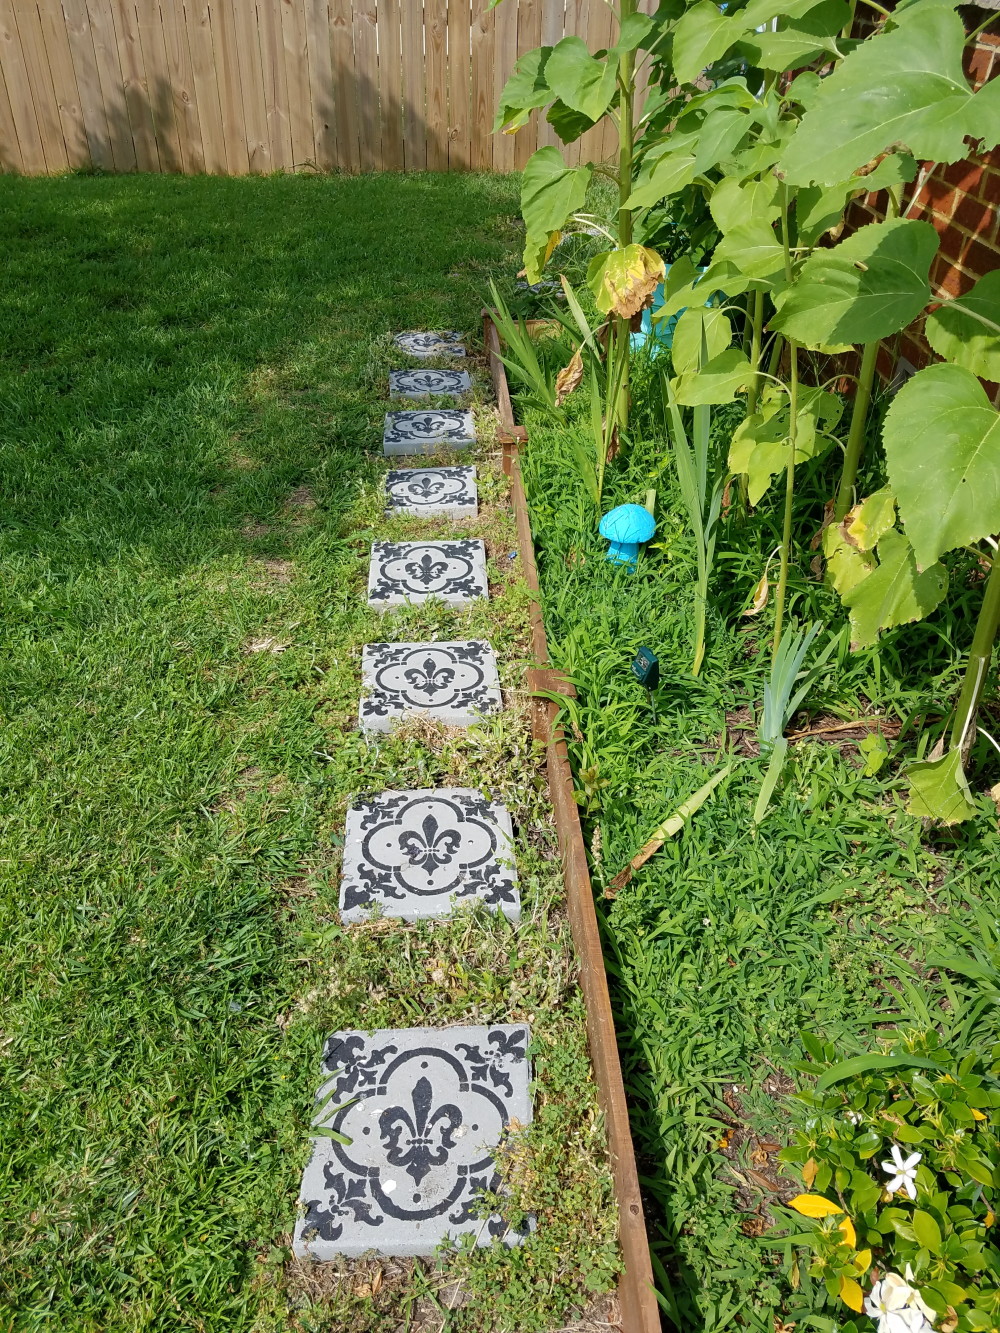 Yard stones painted to have a cement tile look. A boho garden in progress. @adesignerathome